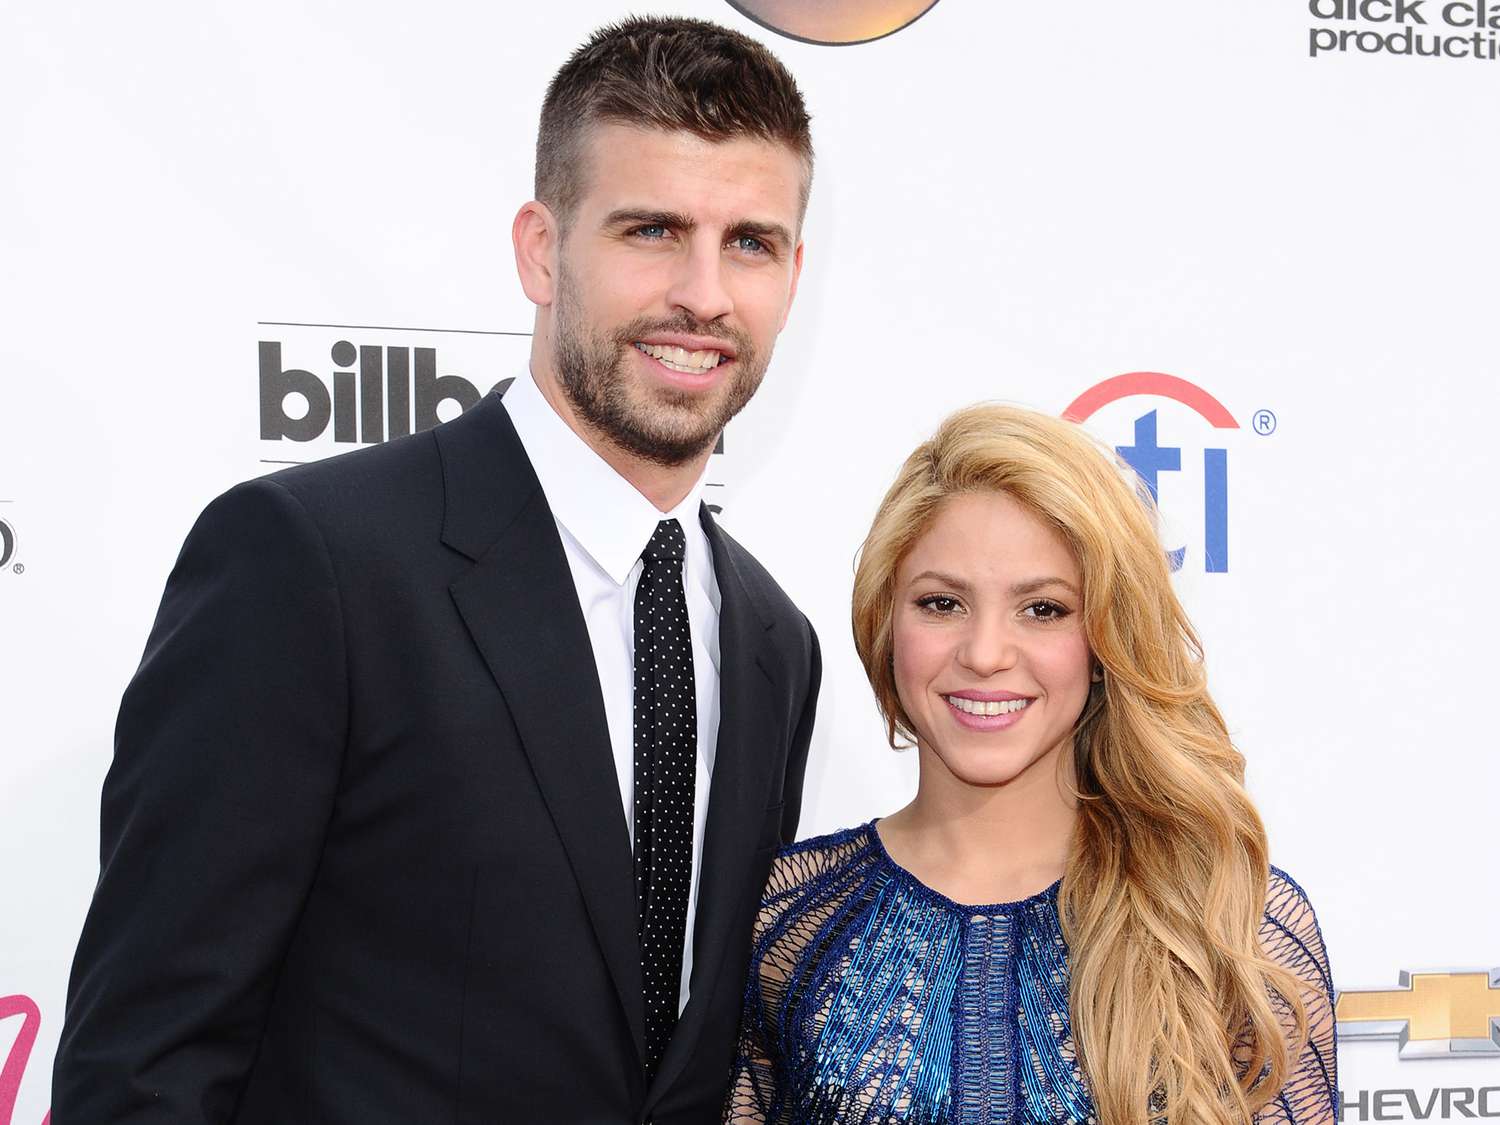 Gerard Pique wearing a black suit and Shakira wearing a blue dress